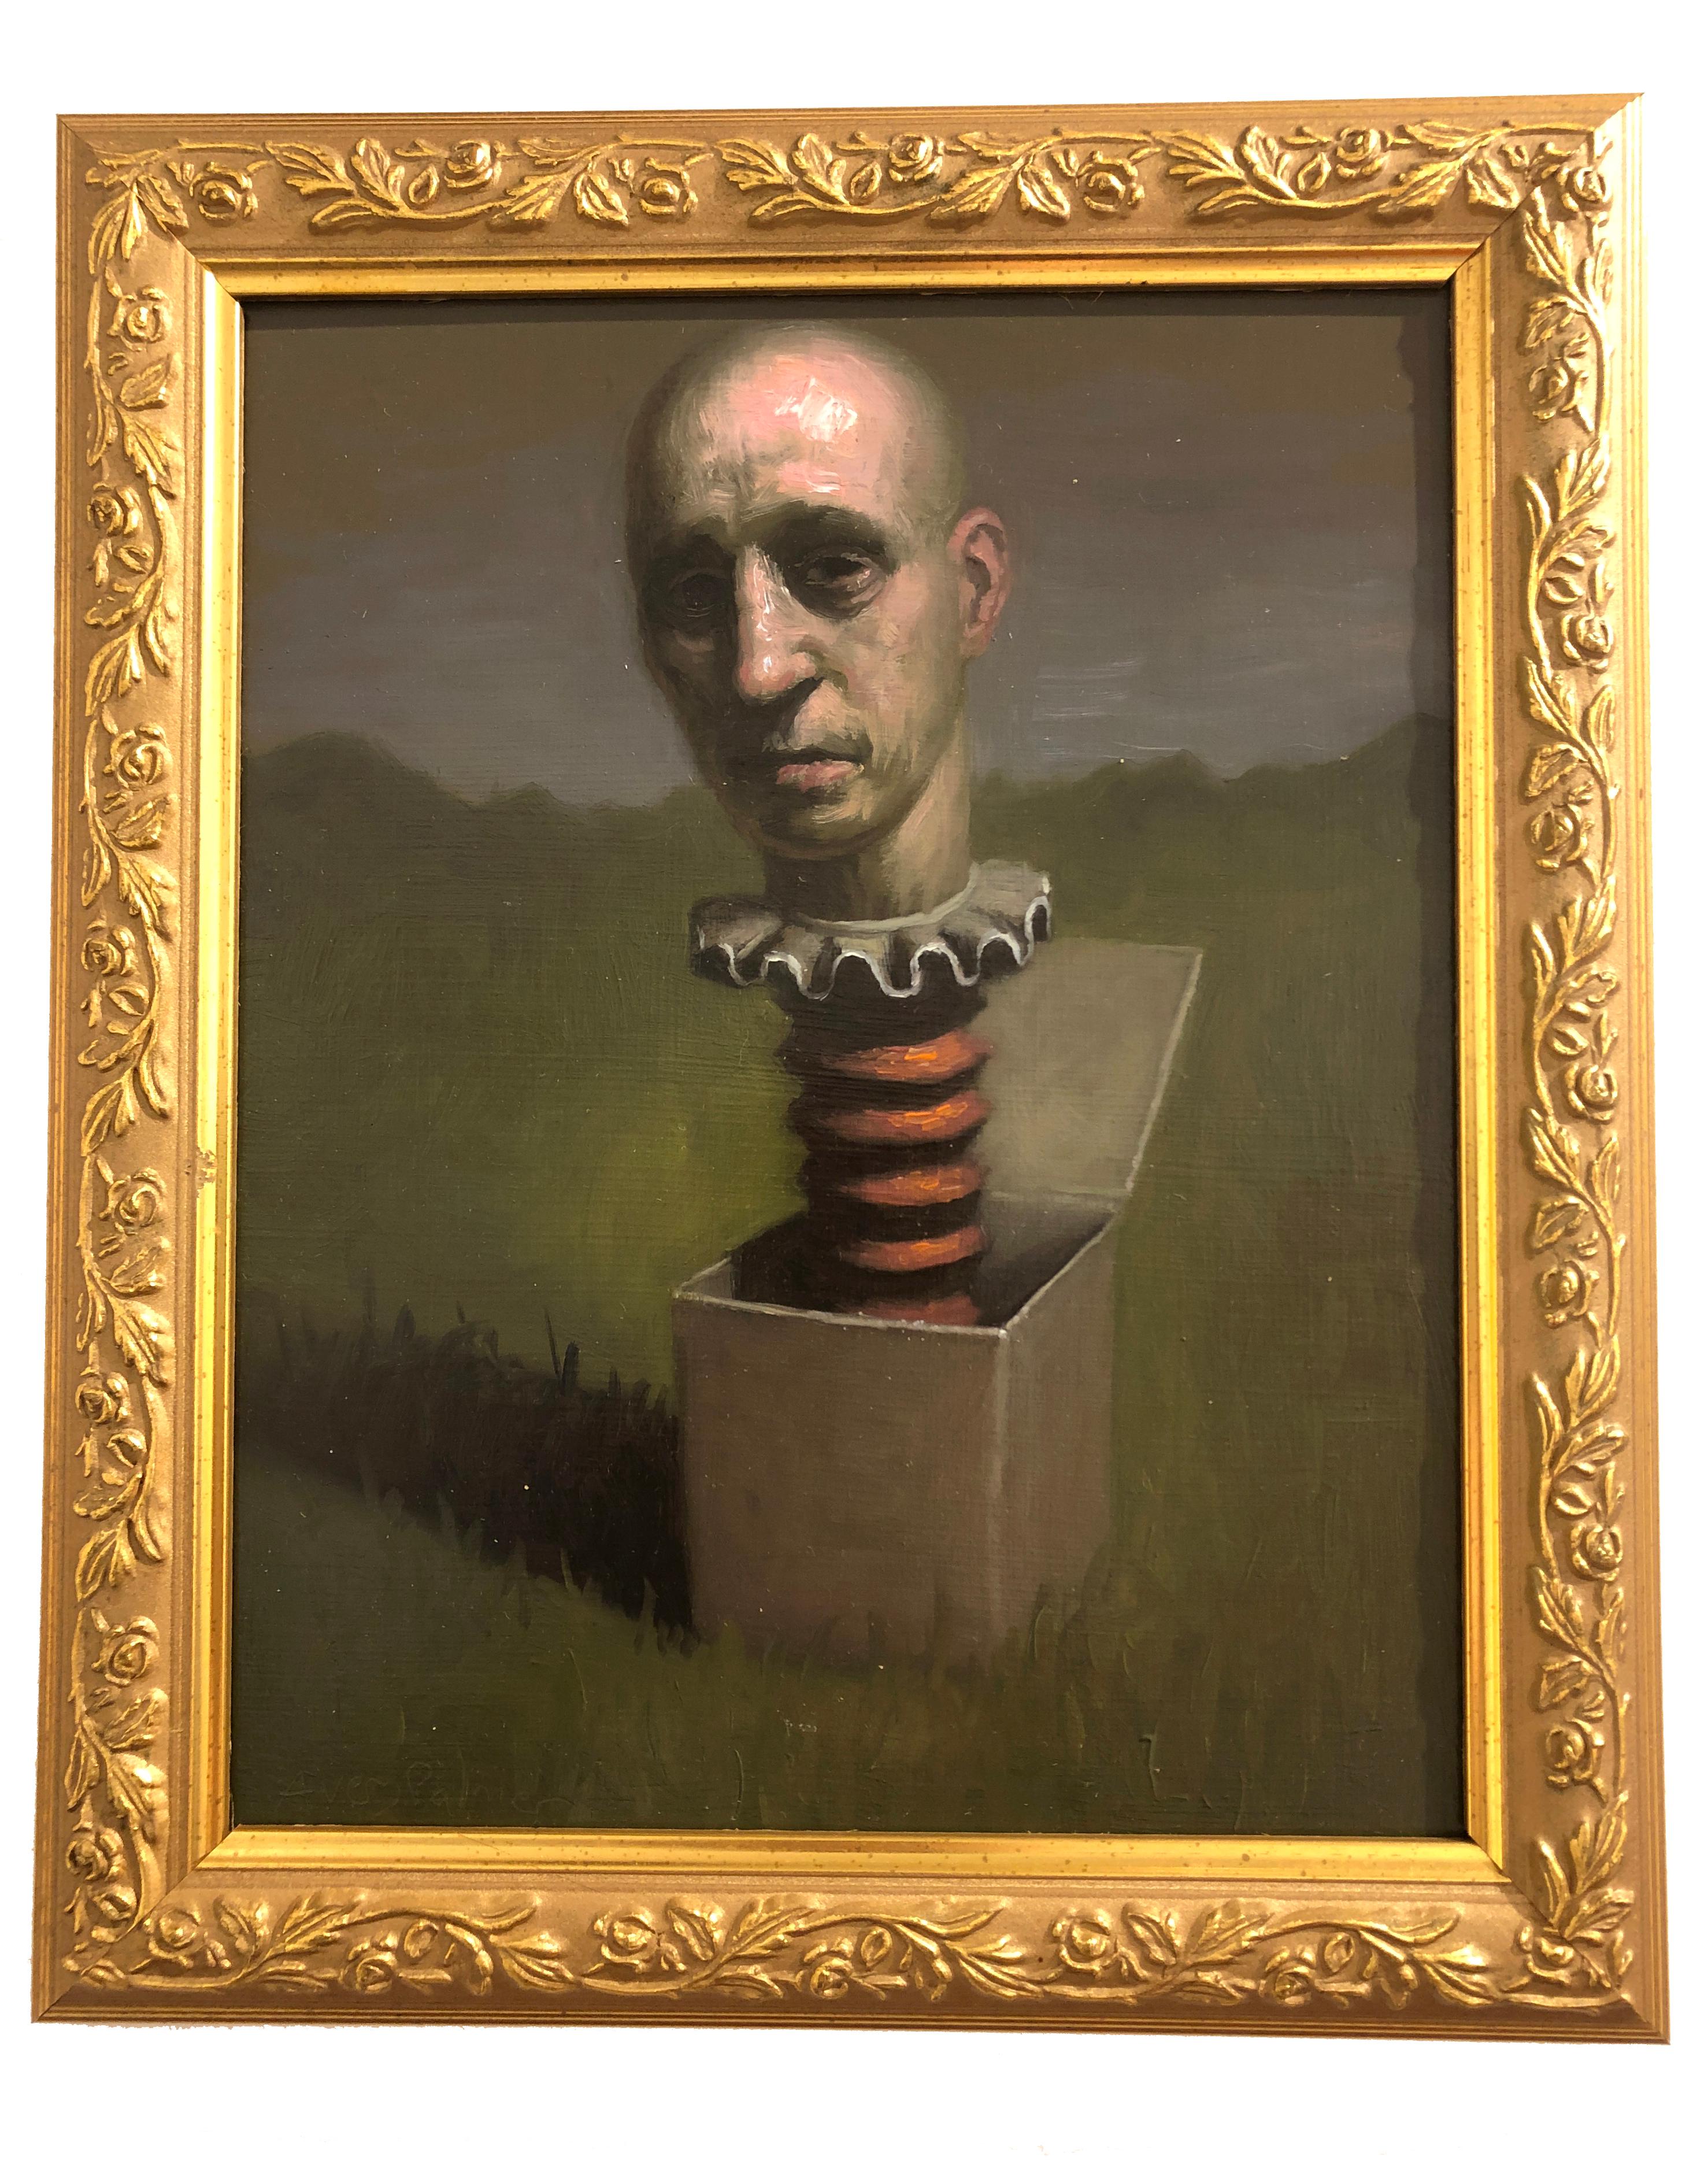 Man Thinking Outside the Box, Avery Palmer, Oil on board, pop surreal figure 1